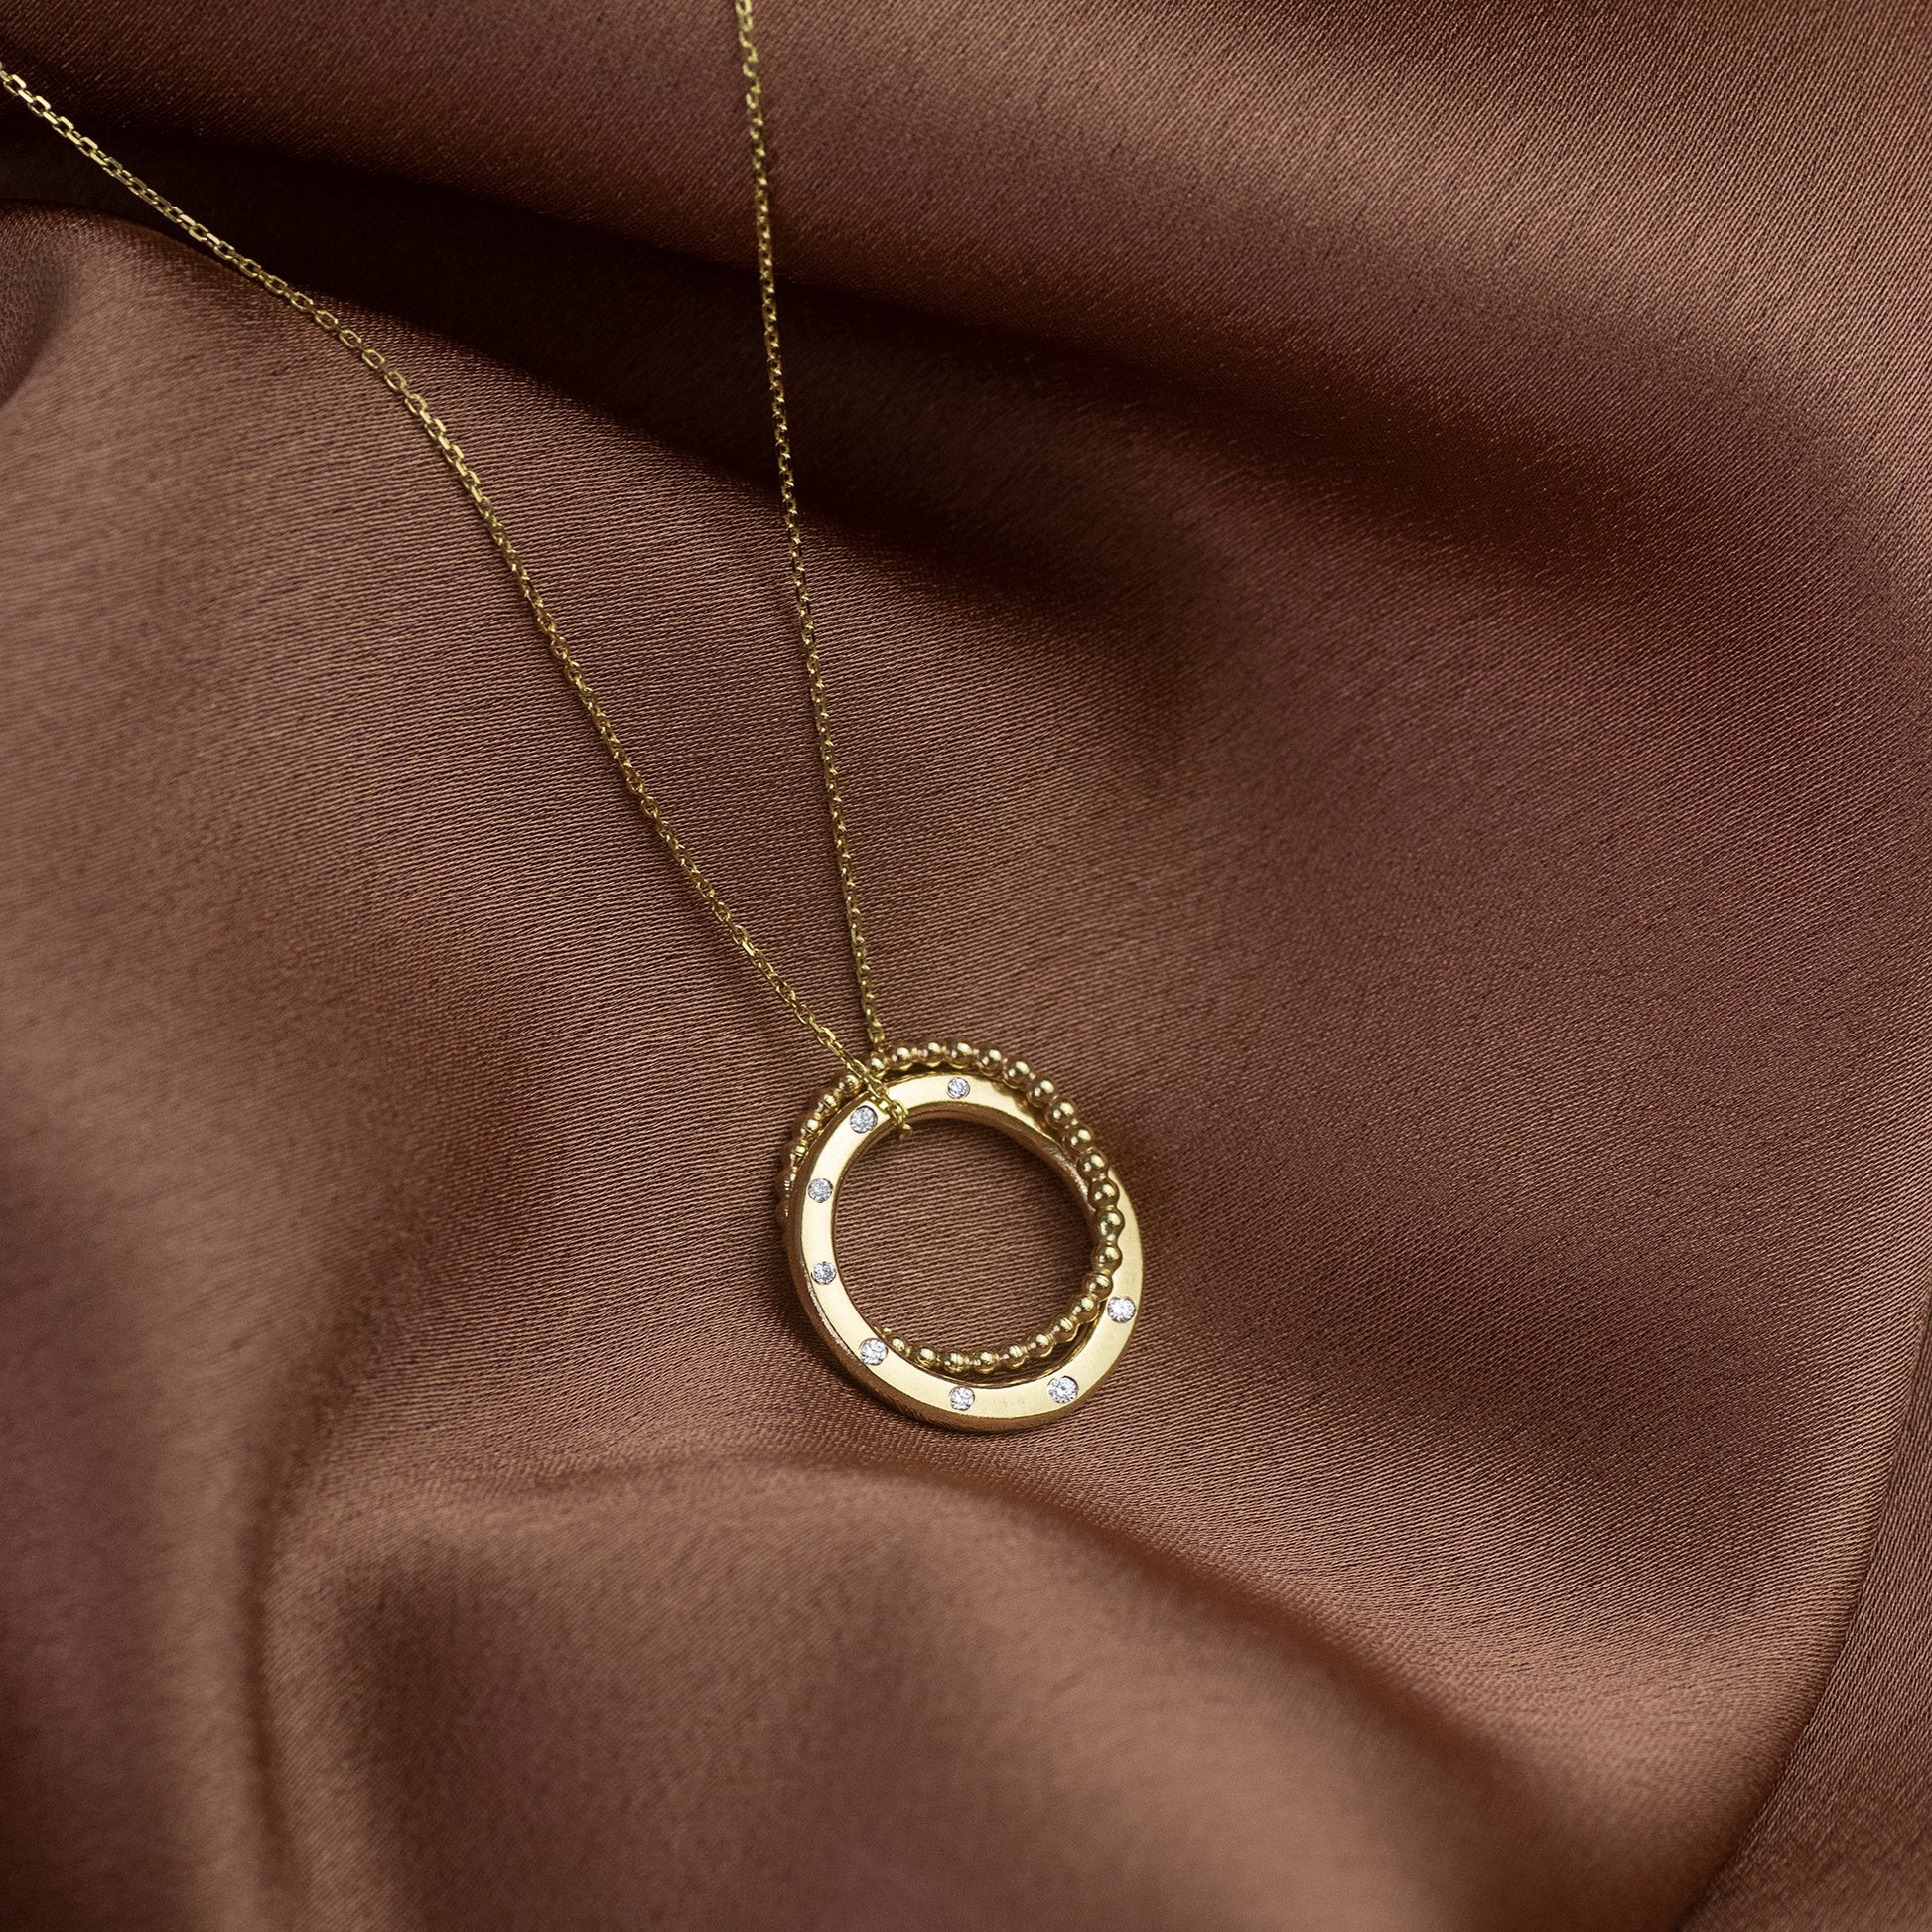 8th Anniversary Necklace - 8 Diamonds for 8 Years - 9kt Gold